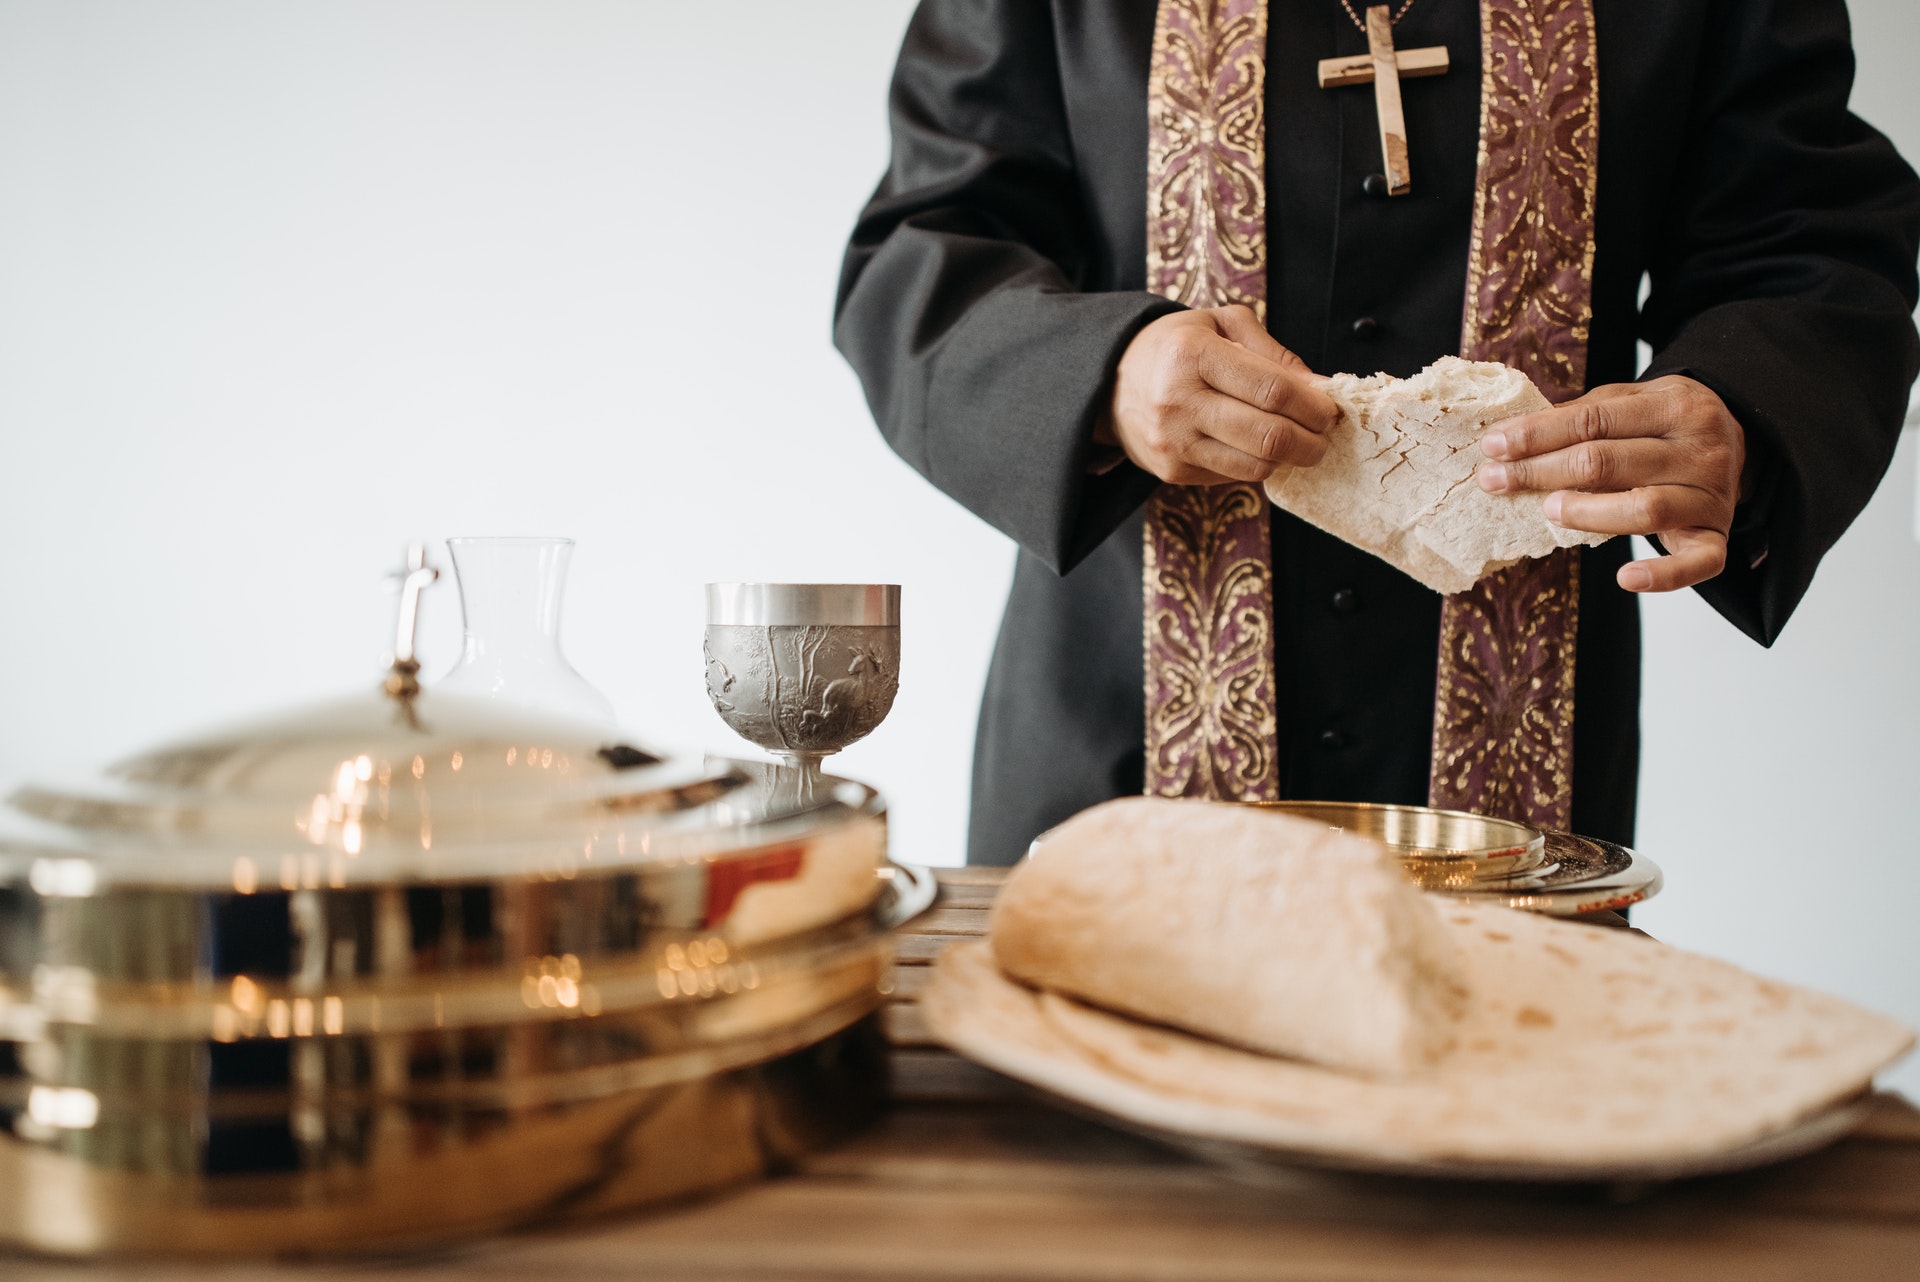 A priest preparing the Eucharist with bread and wine